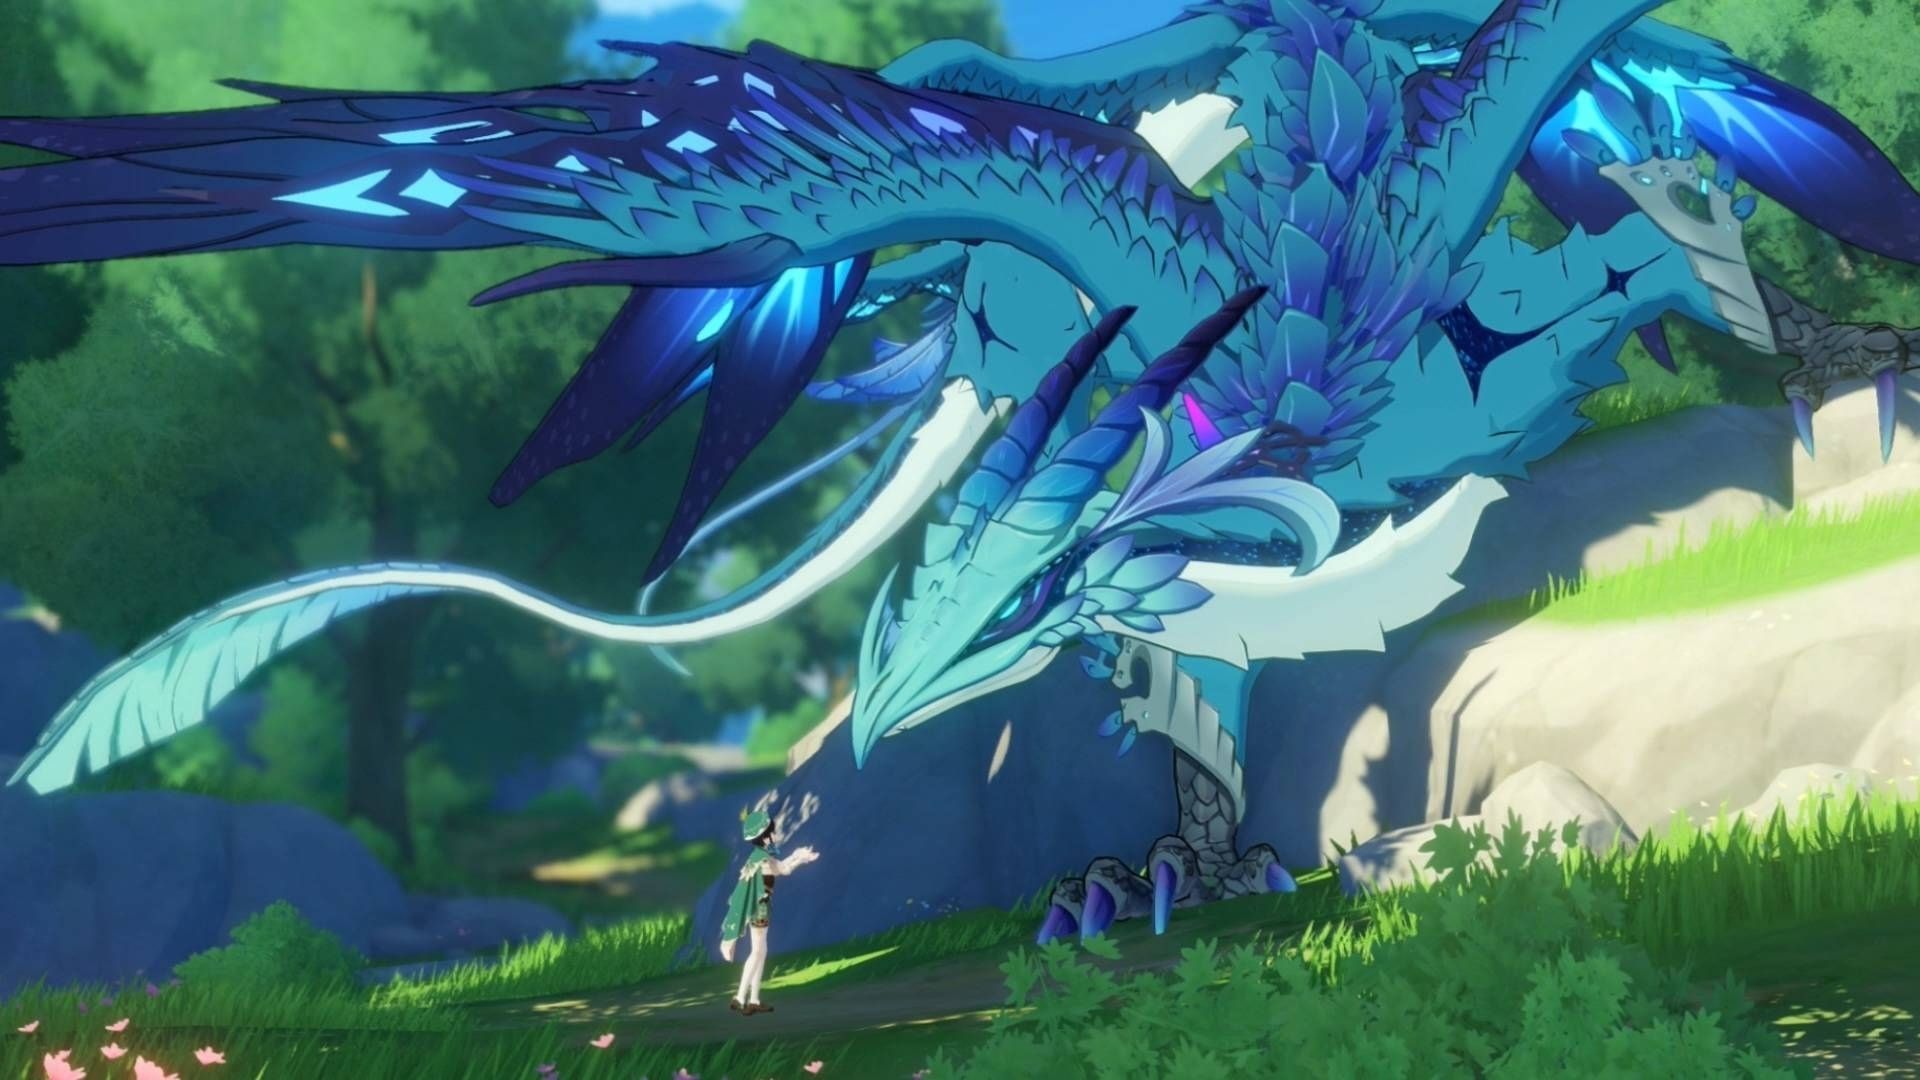 A character from Genshin Impact stroking a giant blue dragon.